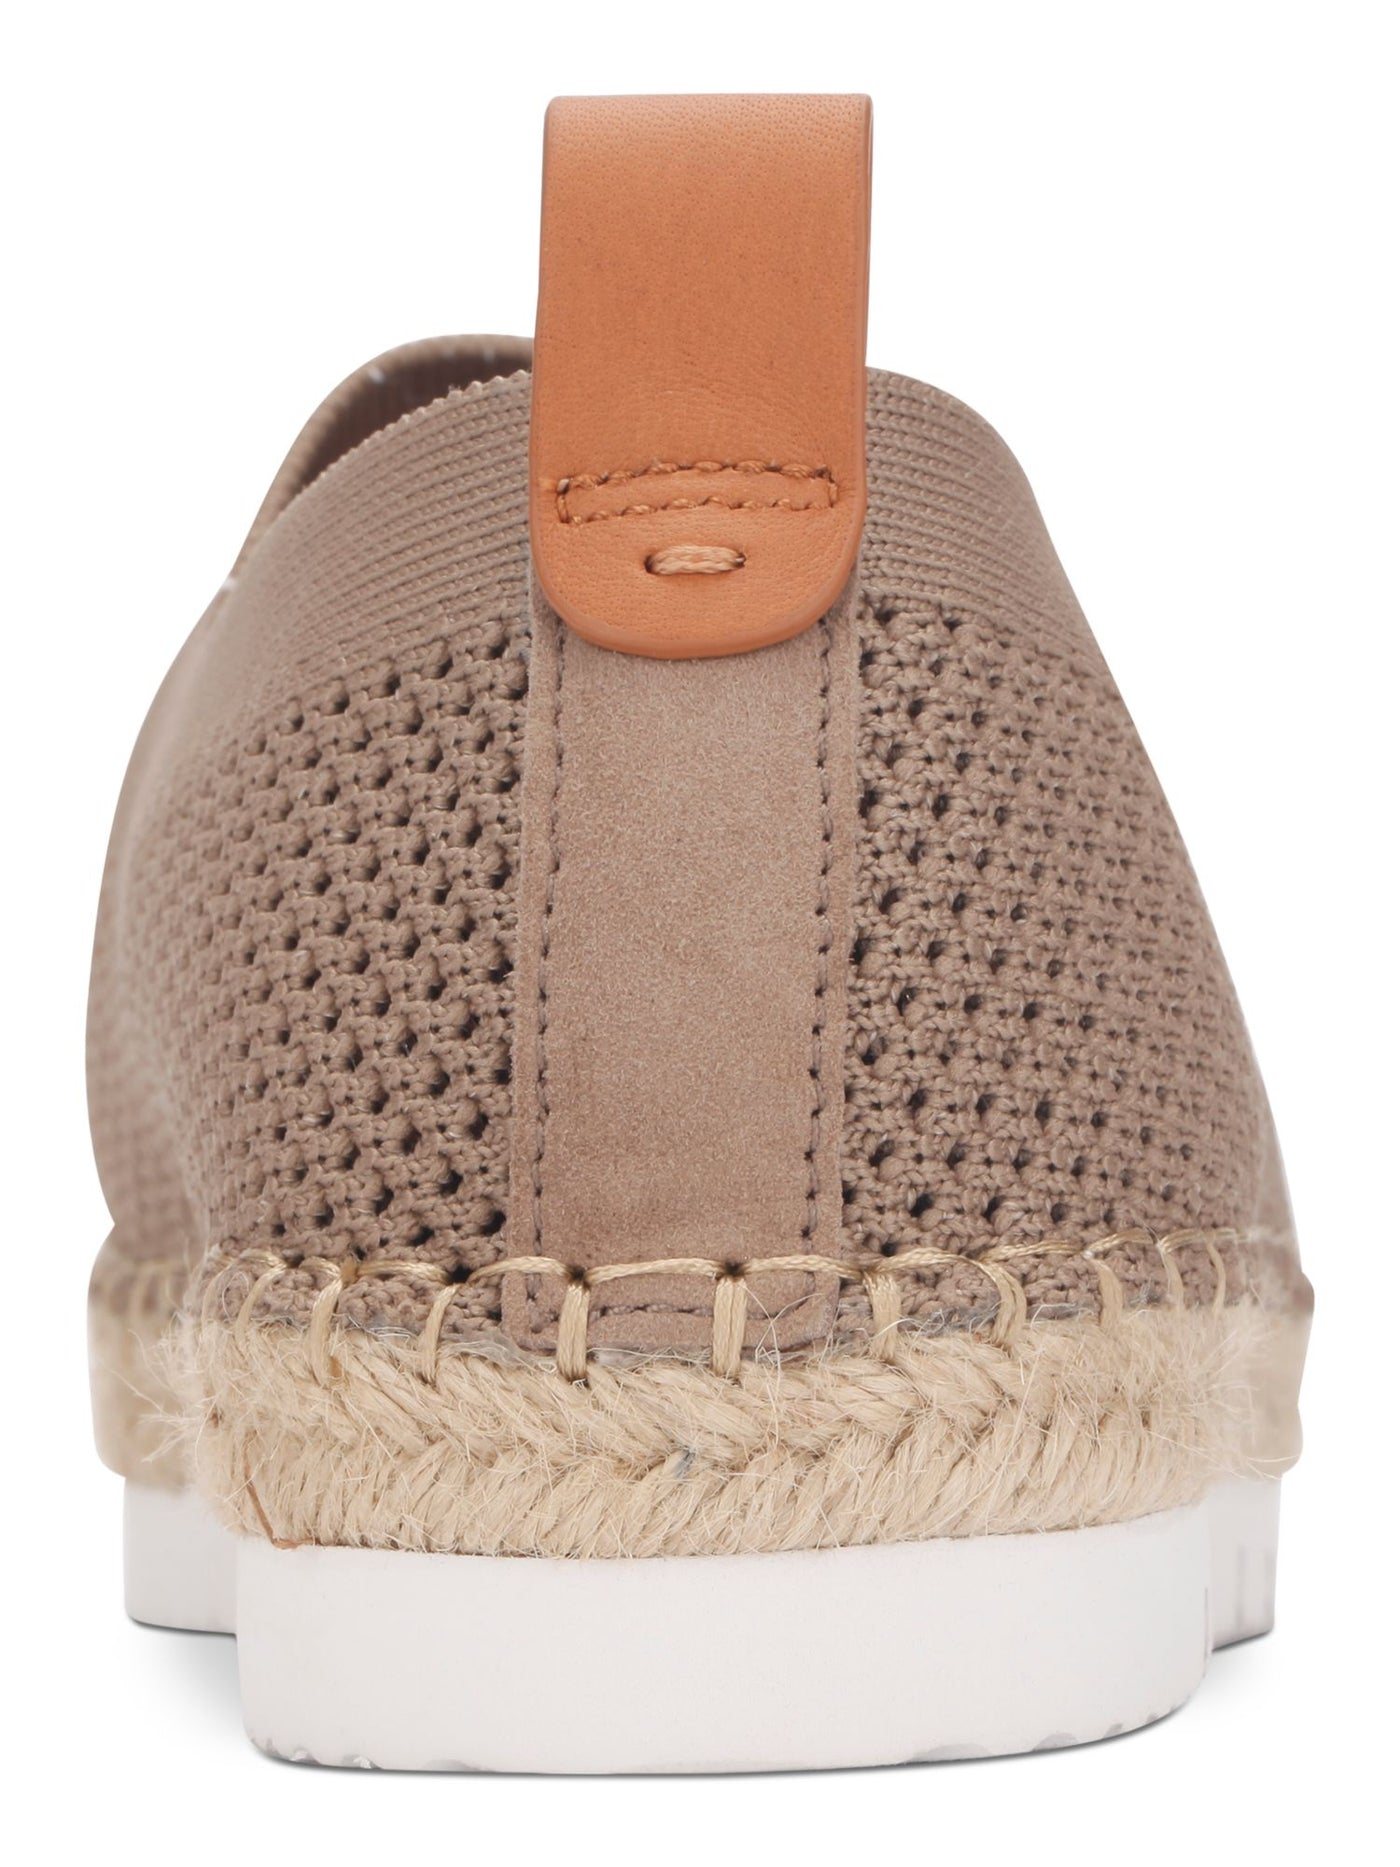 GENTLE SOULS KENNETH COLE Womens Beige Mixed Knit Heel Pull-Tab Cushioned Lizzy Round Toe Wedge Slip On Espadrille Shoes 8.5 M